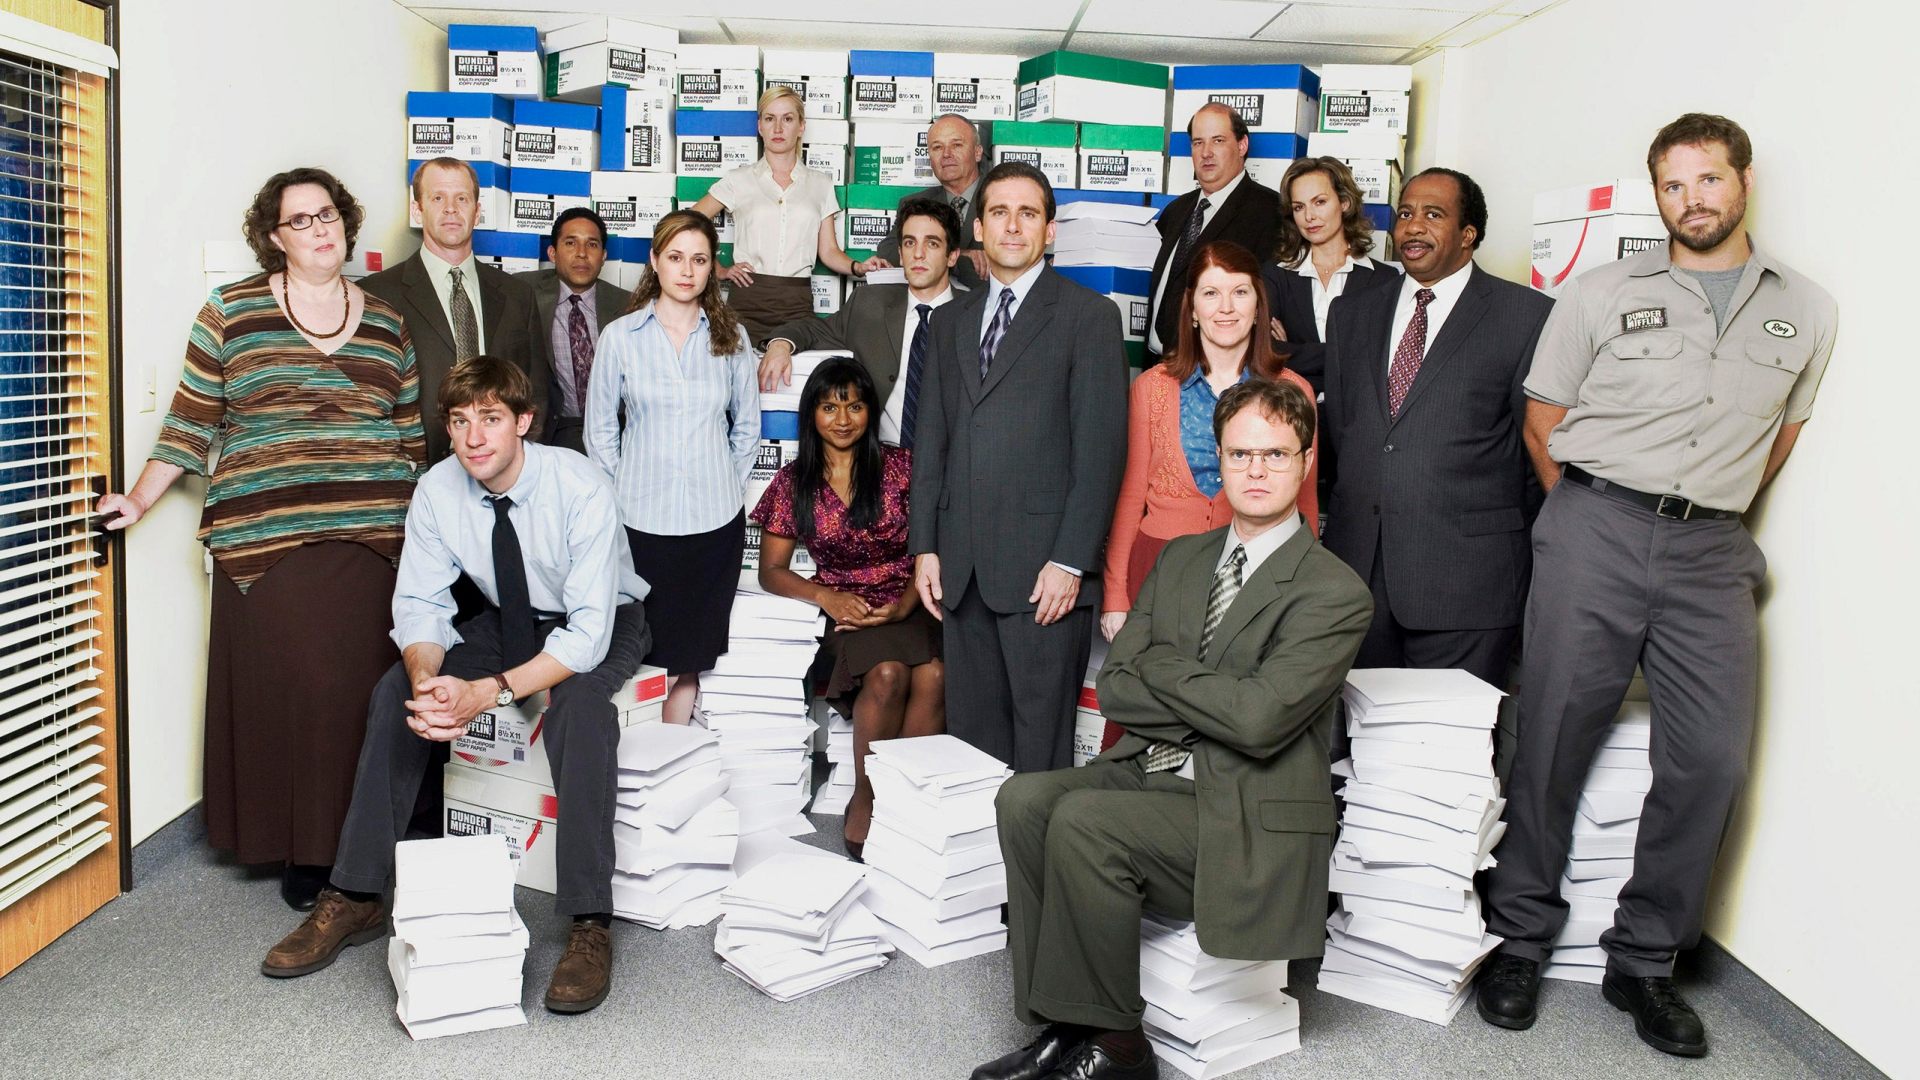 The Office TV remakes